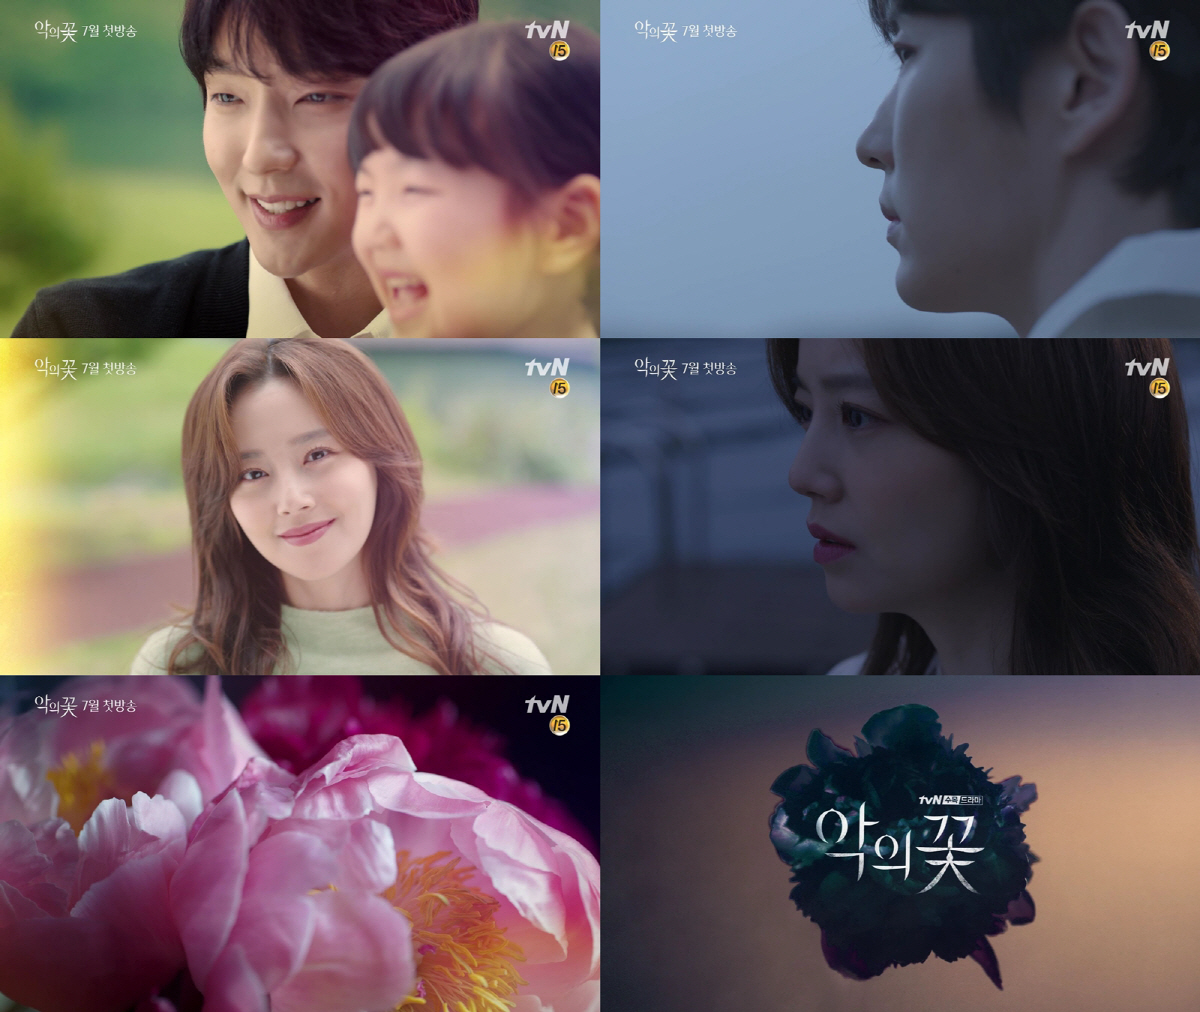 TVN New Tree Drama Flower of Evil released its first teaser video and had an intense impact.Despite the short running time of only 15 seconds, the first video presented at TVNs new tree Drama Flower of Evil, it brought me admiration with the detailed emotional changes and sensual mise-en-scenes of Lee Joon-gi (Baek Hee-seong station), Moon Chae-won (Cha JiWon station).The two videos released were made with the gaze of the couple, Baek Hee-Seong (Lee Joon-gi), who had been in love for 14 years, respectively, and Cha JiWon (Moon Chae-won).The memories of marriage pass through the warm eyes looking at each other, the affectionate smile, the grasped hands, and the time with the daughter who runs clear.However, this happiness also briefly sat on the rocking chair, leaving only a disorganized blanket, and suddenly two people became alone, and a meaningful airflow was detected.Especially, the empty eyes of the Odokani line Baek Hee-seong and the confused expression of Cha JiWon in the atmosphere of the cold dawn are caught, and it is presumed that something unusual happened to break the happy memory of the two people.Here, the contrasting atmosphere is once again shown the color of melodrama and suspense that the flower of evil will capture as the different tone of scenes are crossed.In addition, the beautiful peony flowers that were seen at the beginning appeared in a blackened appearance at the end of the video, raising the question of what stories will be bloomed by this flower of evil that began to sprout between the beliefs and doubts of the two.On the other hand, Flower of Evil will be broadcasted first in July as a high-density emotional tracking drama of two people facing the truth that they want to ignore, the man who played love, Baek Hee-seong, and his wife Cha JiWon, who started to doubt his reality.